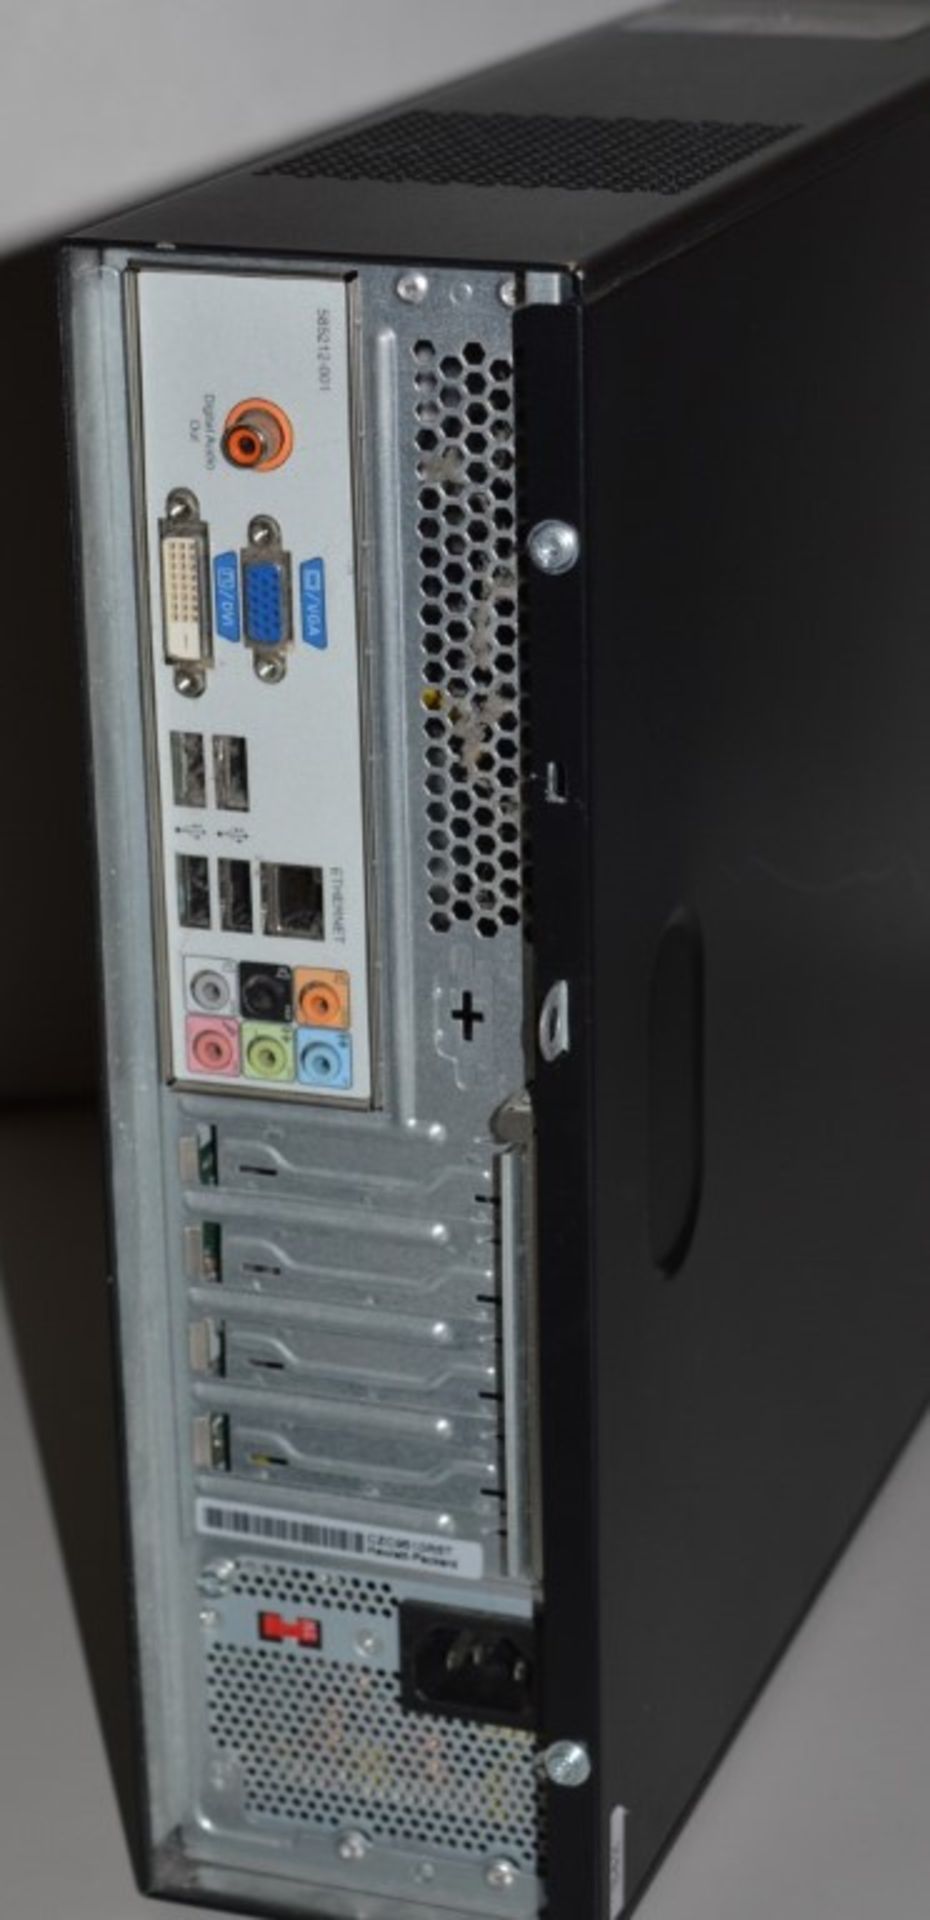 1 x HP Pro 3010 Small Form Factor PC - Features Intel Core 2 Duo 2.9ghz Processor, 4gb DDR3 Ram, - Image 3 of 3